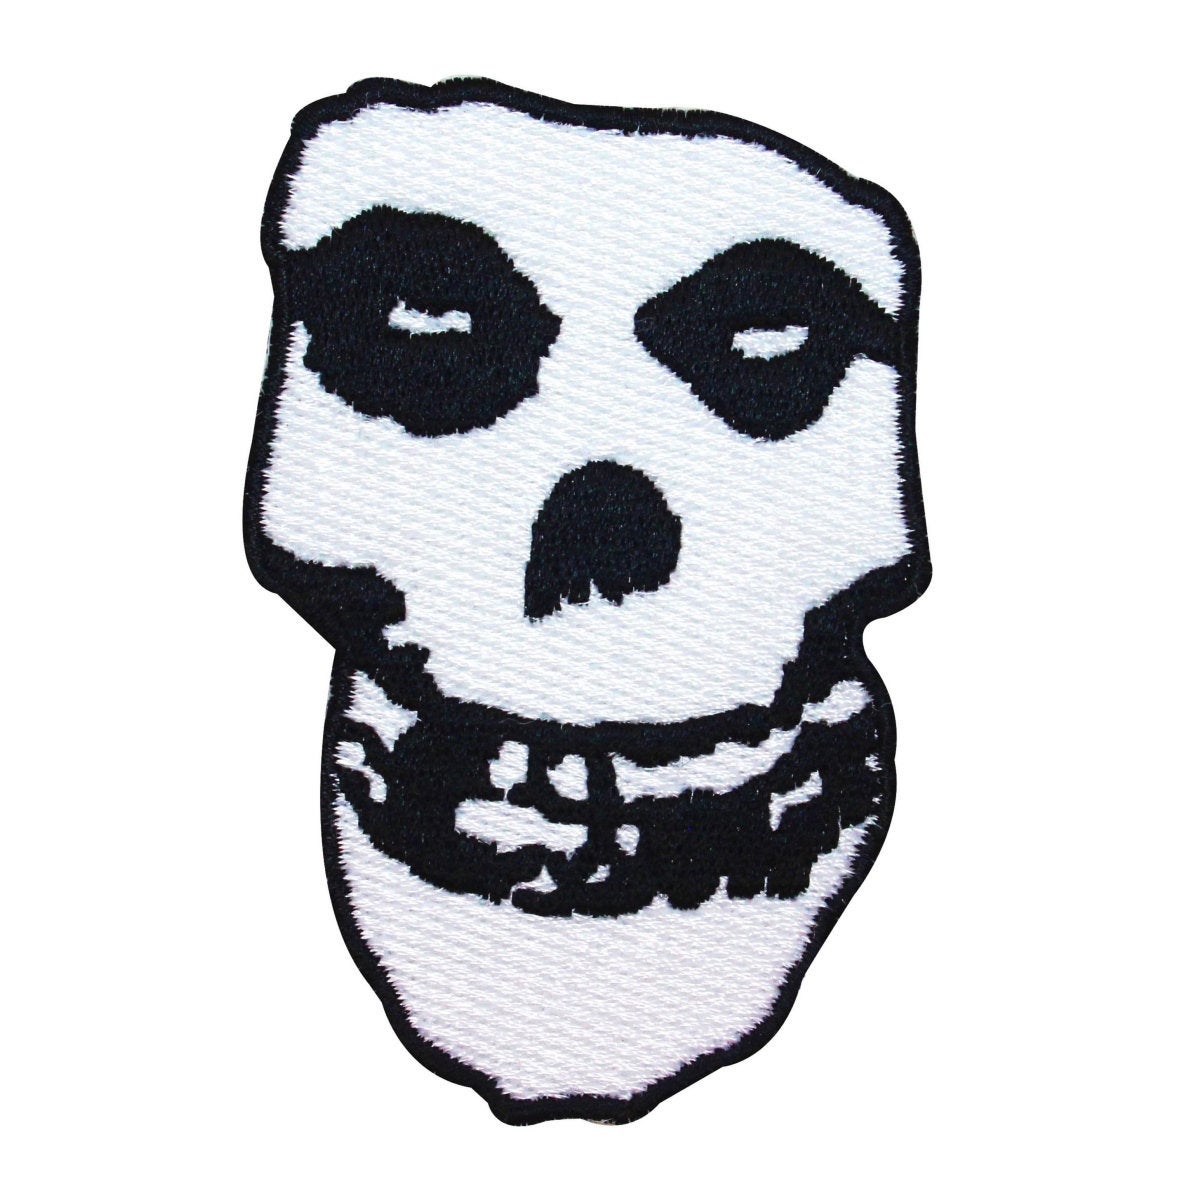 The Misfits Patch - Embroidered Crimson Ghost Skull - Punk Rock Band Logo  Patches - Horror Punk Music - Iron On Embroidery - Size: 10.8 x 15.6 inches